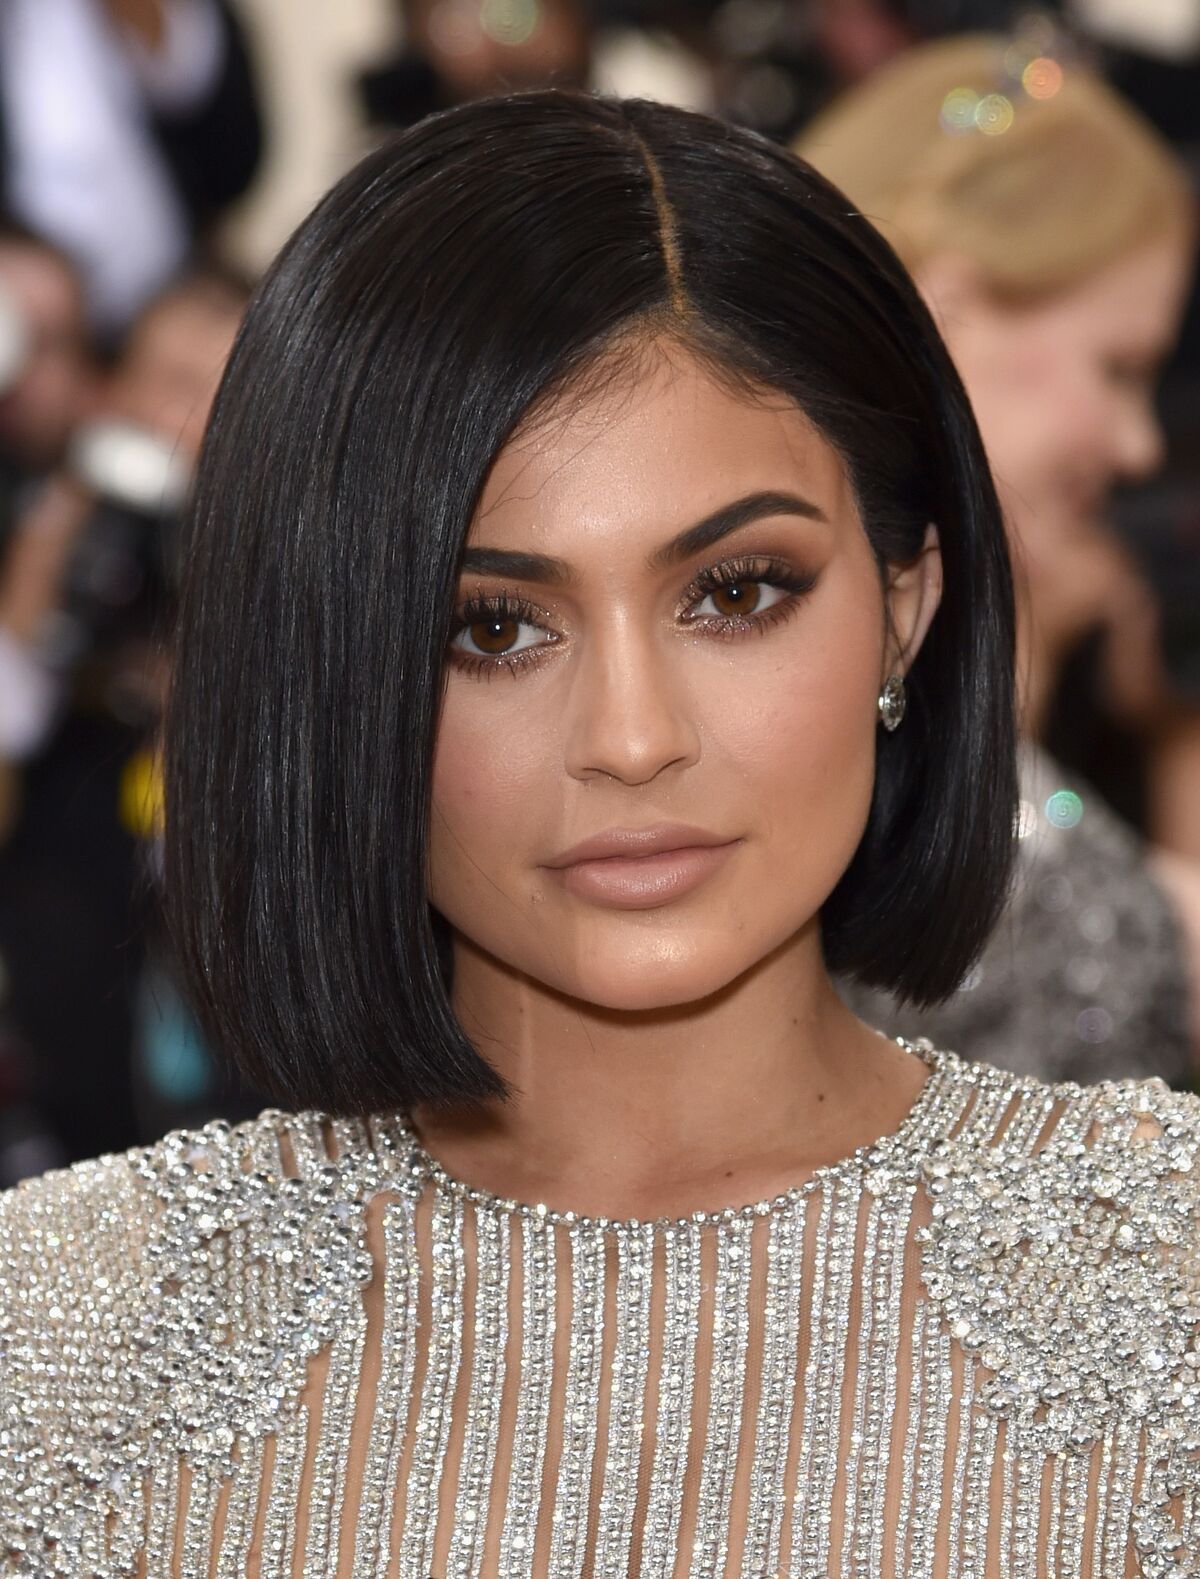 Kylie Jenner attends the "Manus x Machina: Fashion In An Age Of Technology" Costume Institute Gala at Metropolitan Museum of Art on May 2, 2016 in New York City | Photo: Getty Images